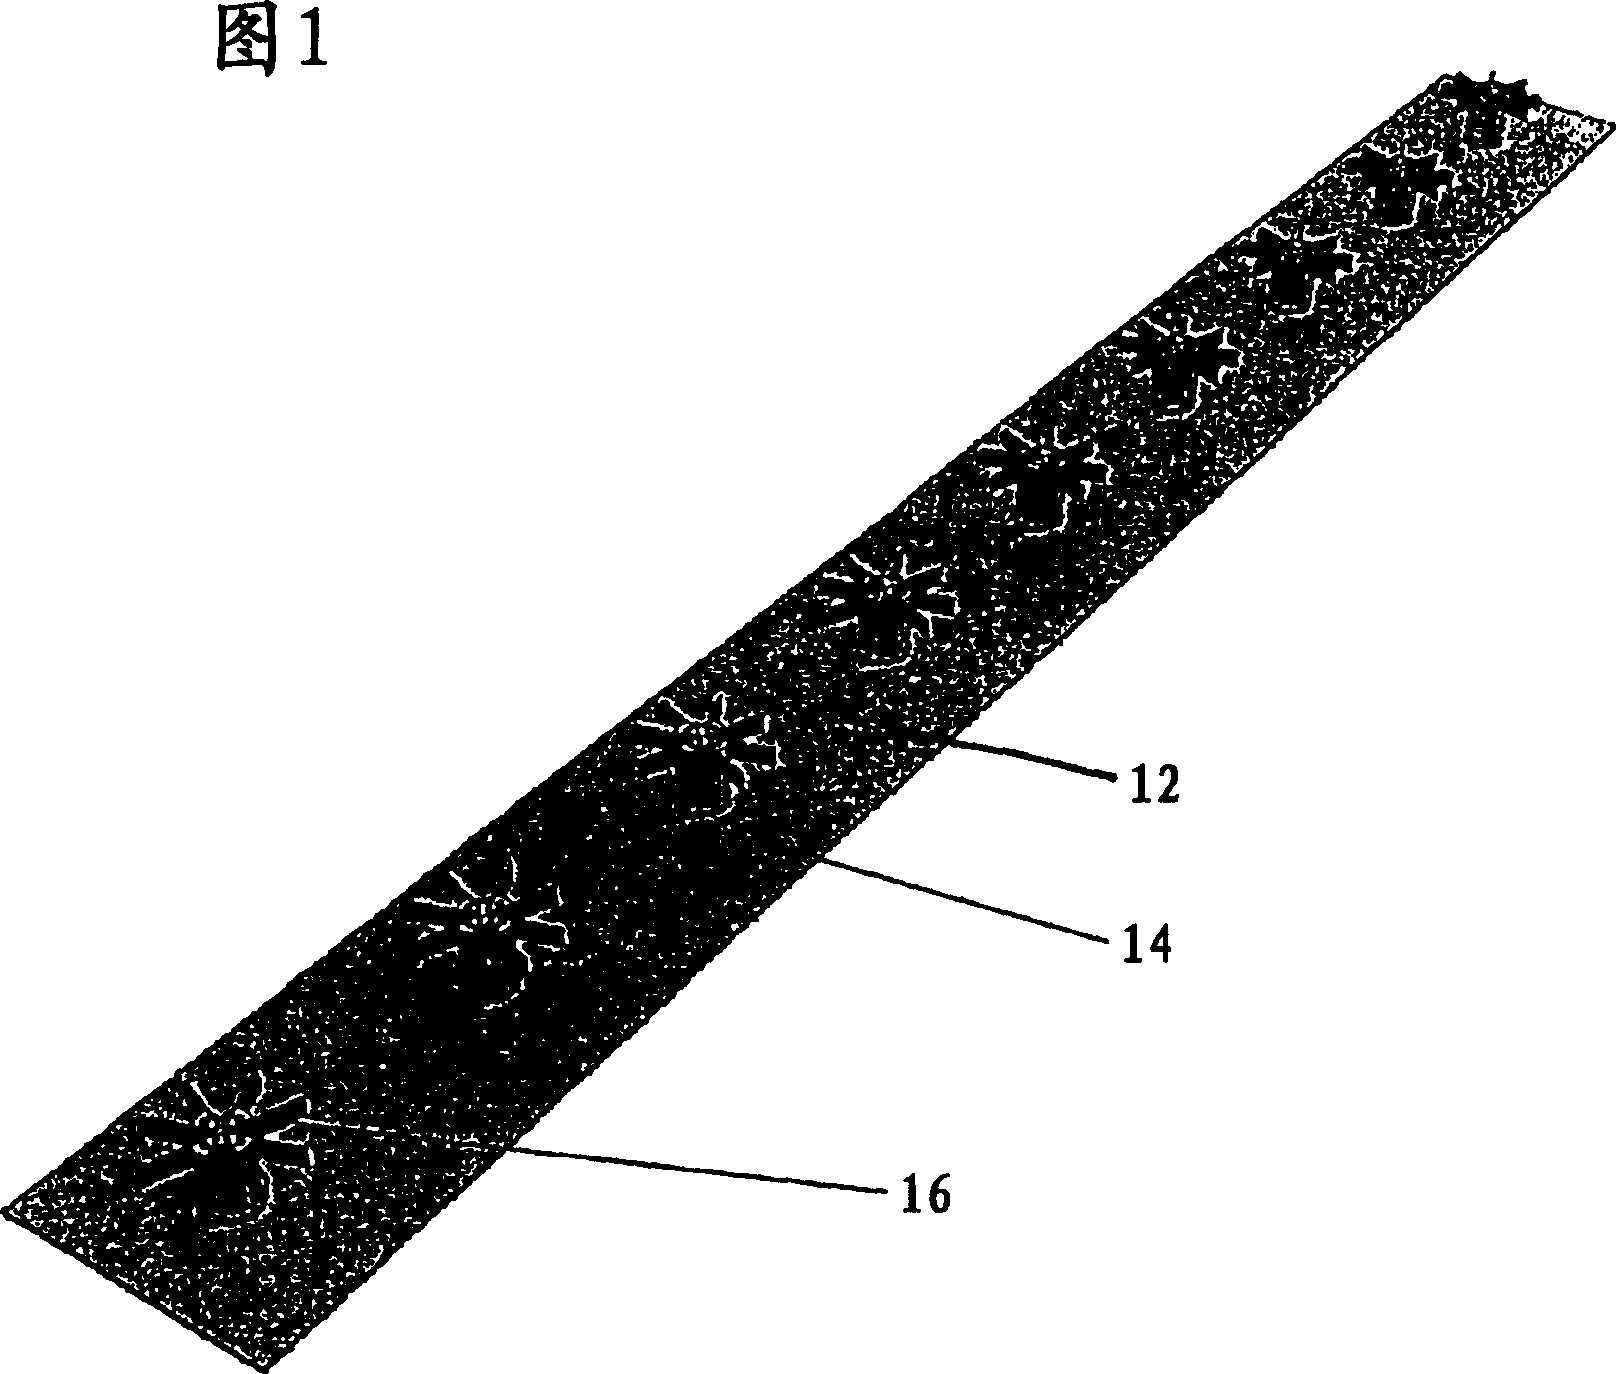 Single or double polarized moulding compound dipole antenna with integral feed structure